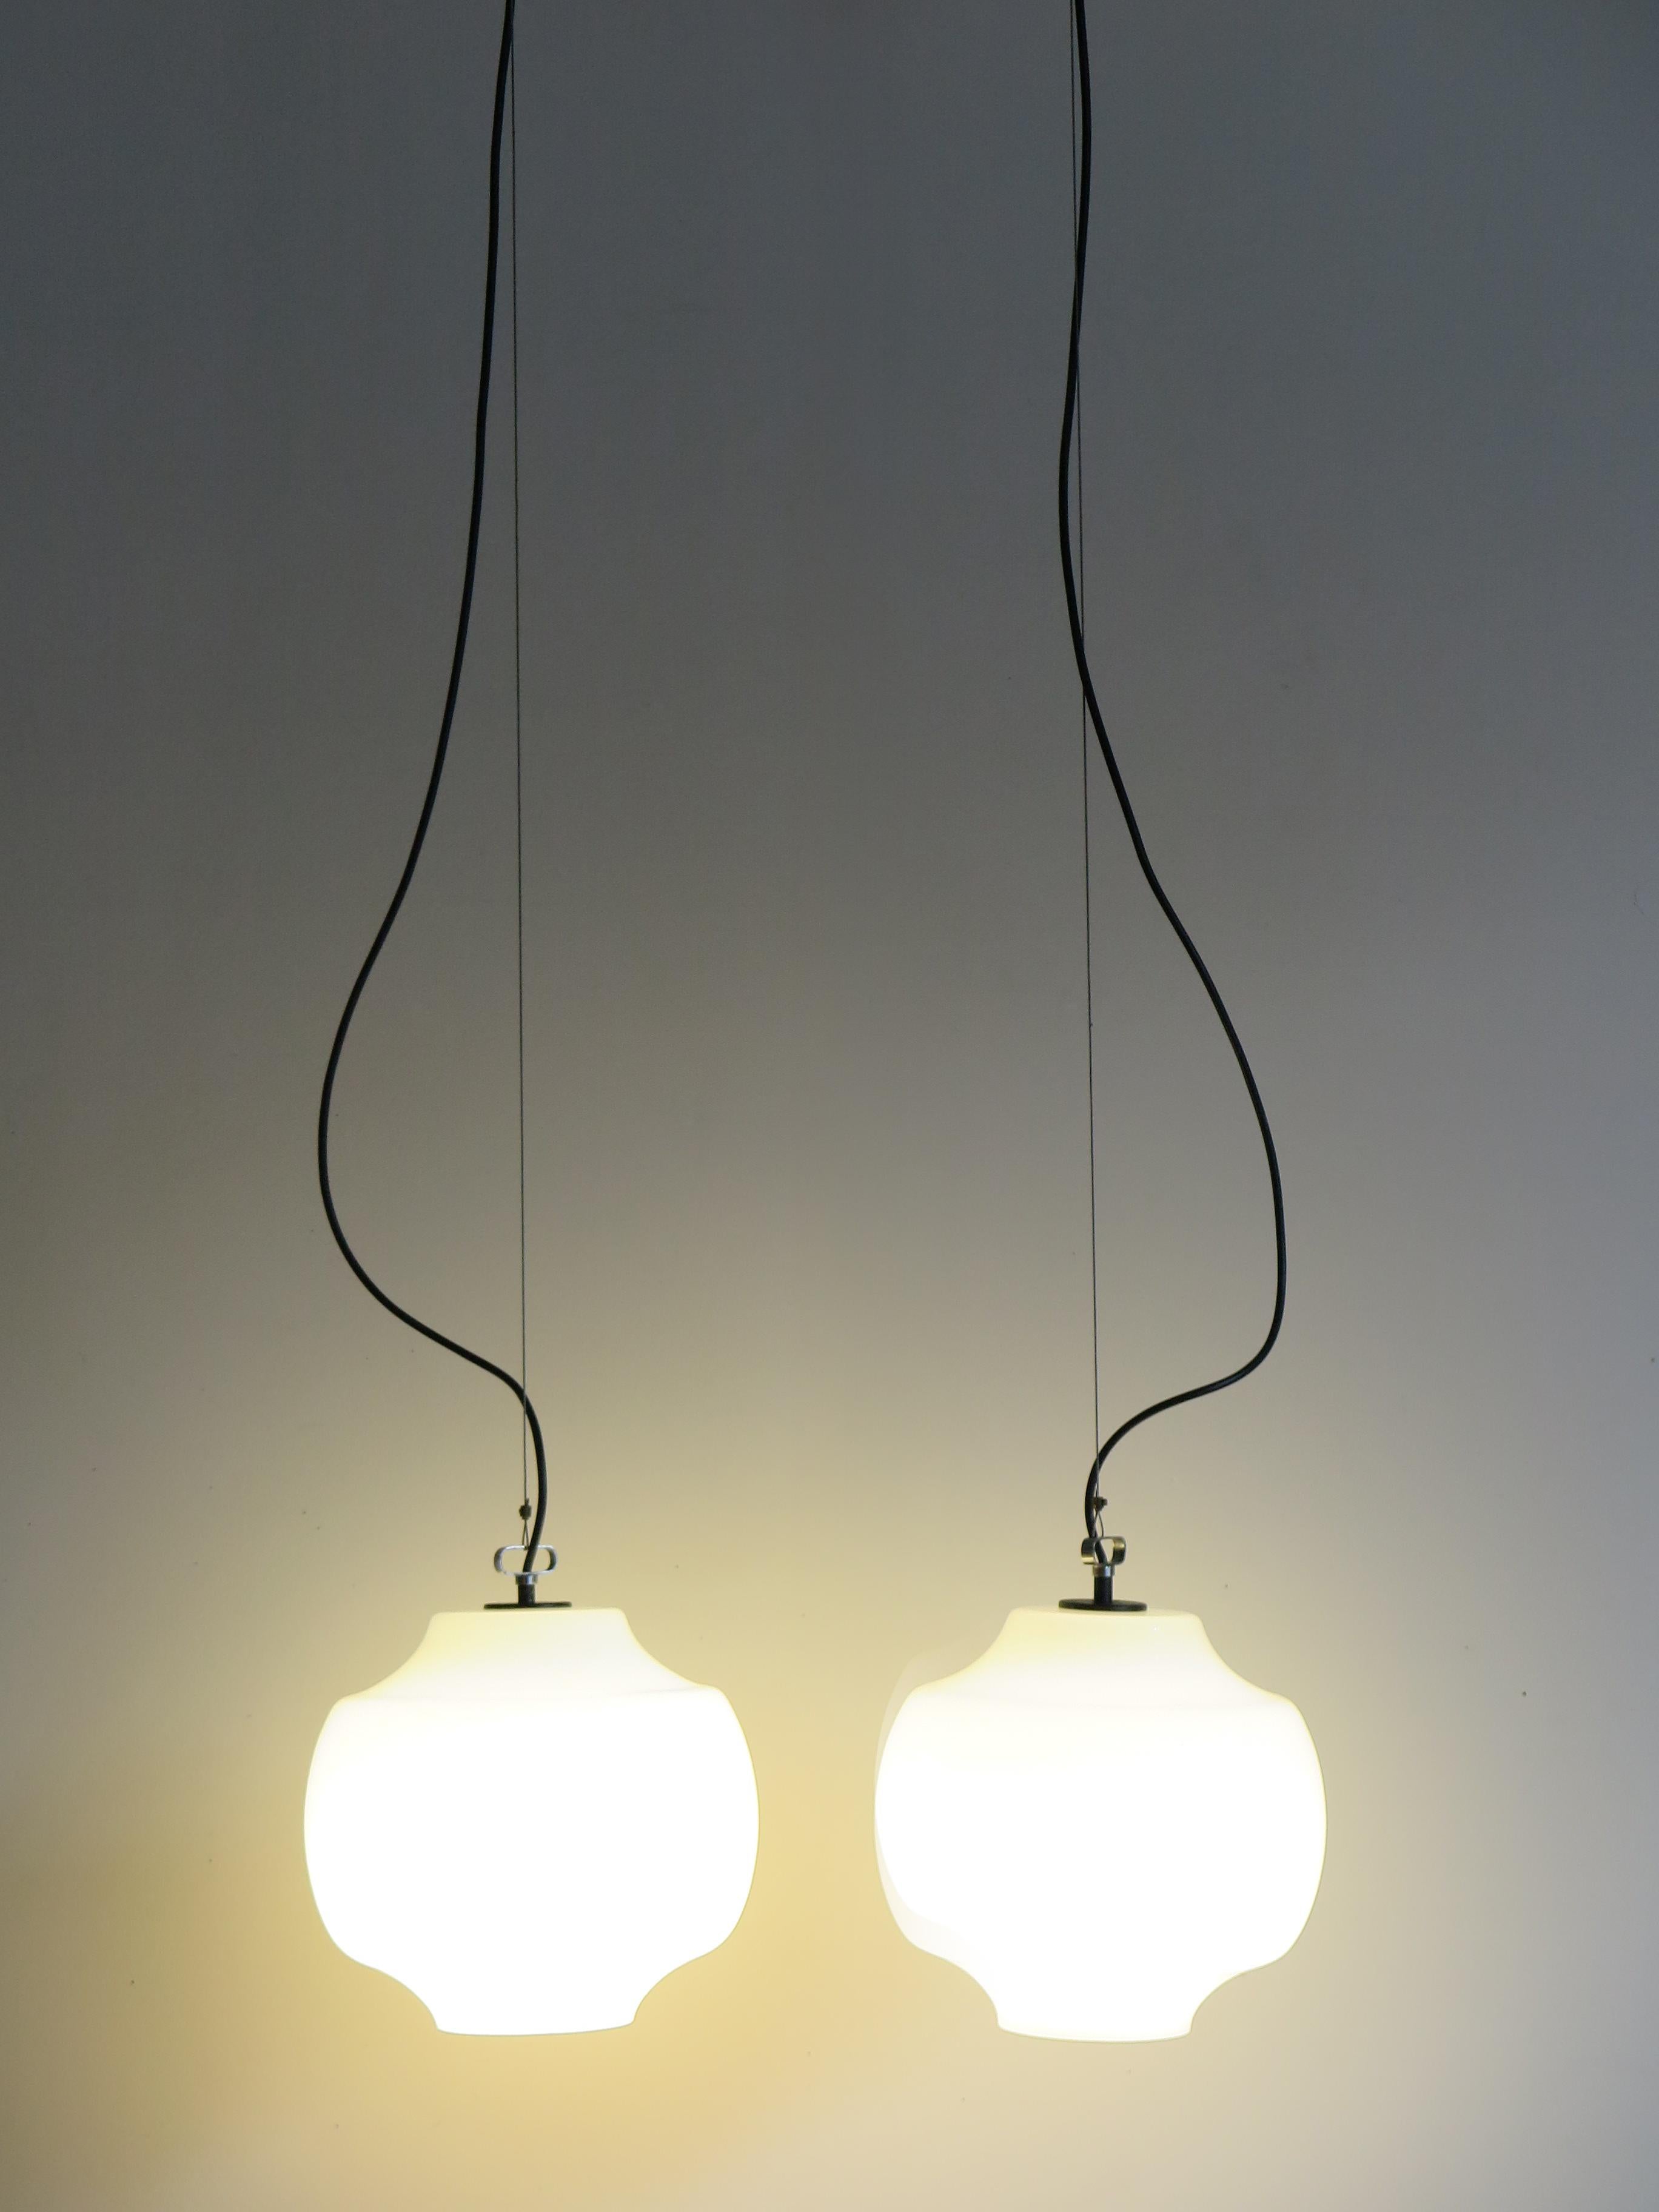 Italian Mid-Century Modern design set of two pendant lamps designed by Massimo Vignelli and produced by Venini with Murano glasses and details in lacquered metal, 1960s

Please note that the lamps are original of the period and this shows normal